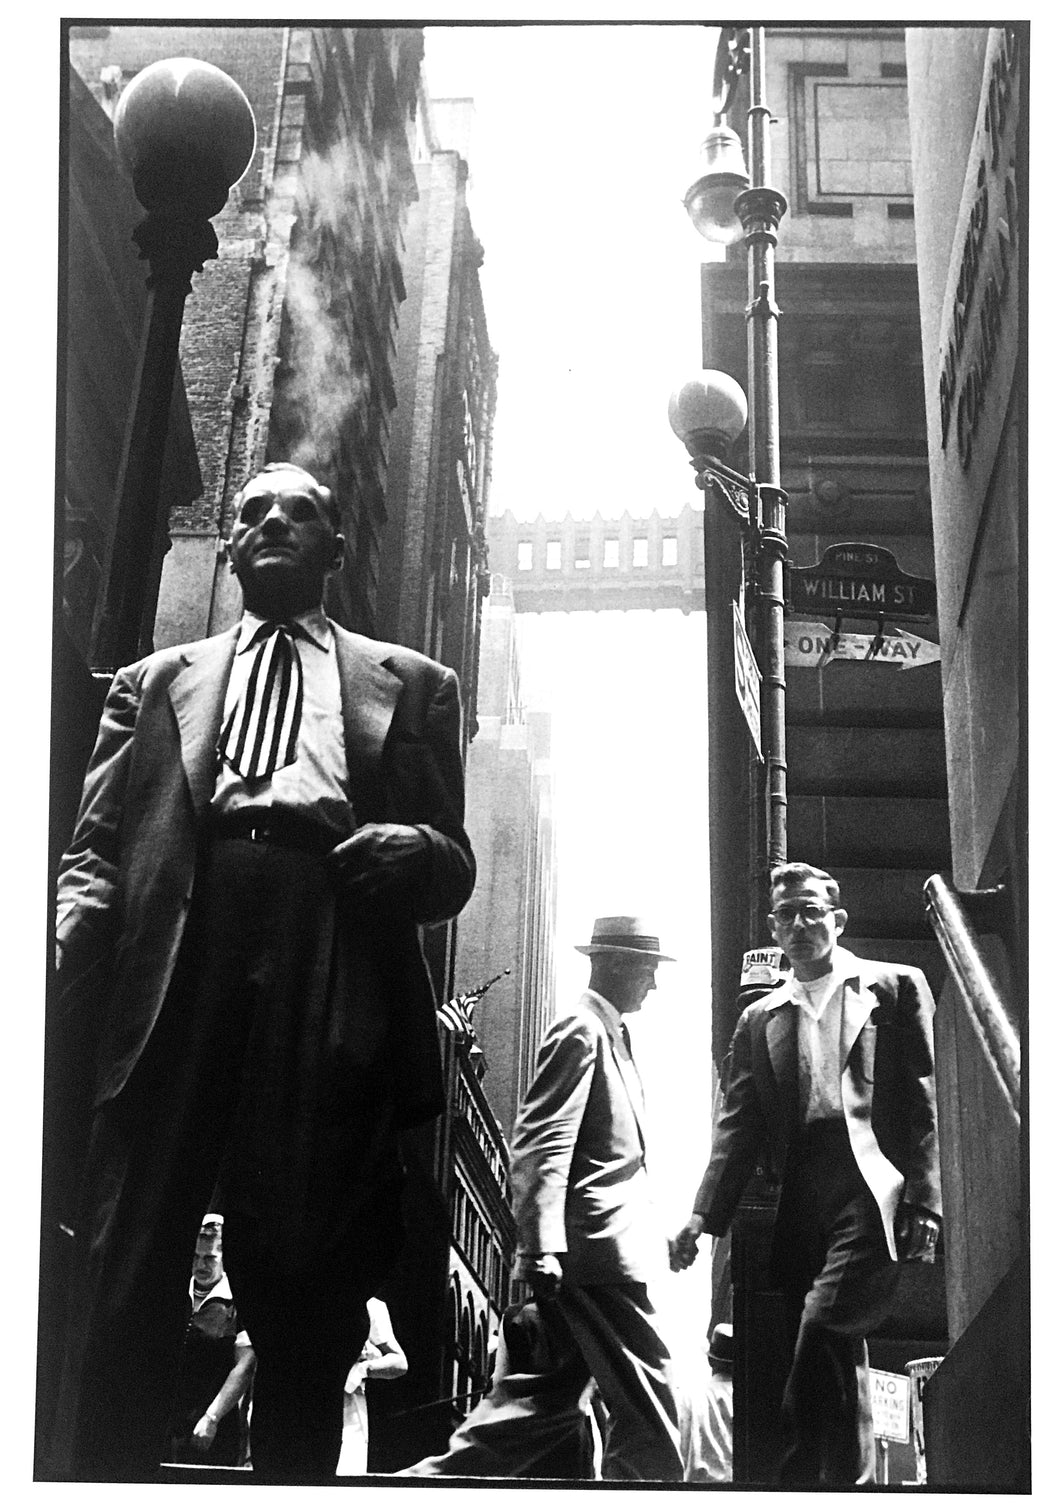 Wall Street, New York City, by Leonard Freed, Black and White Documentary Photography 1950s